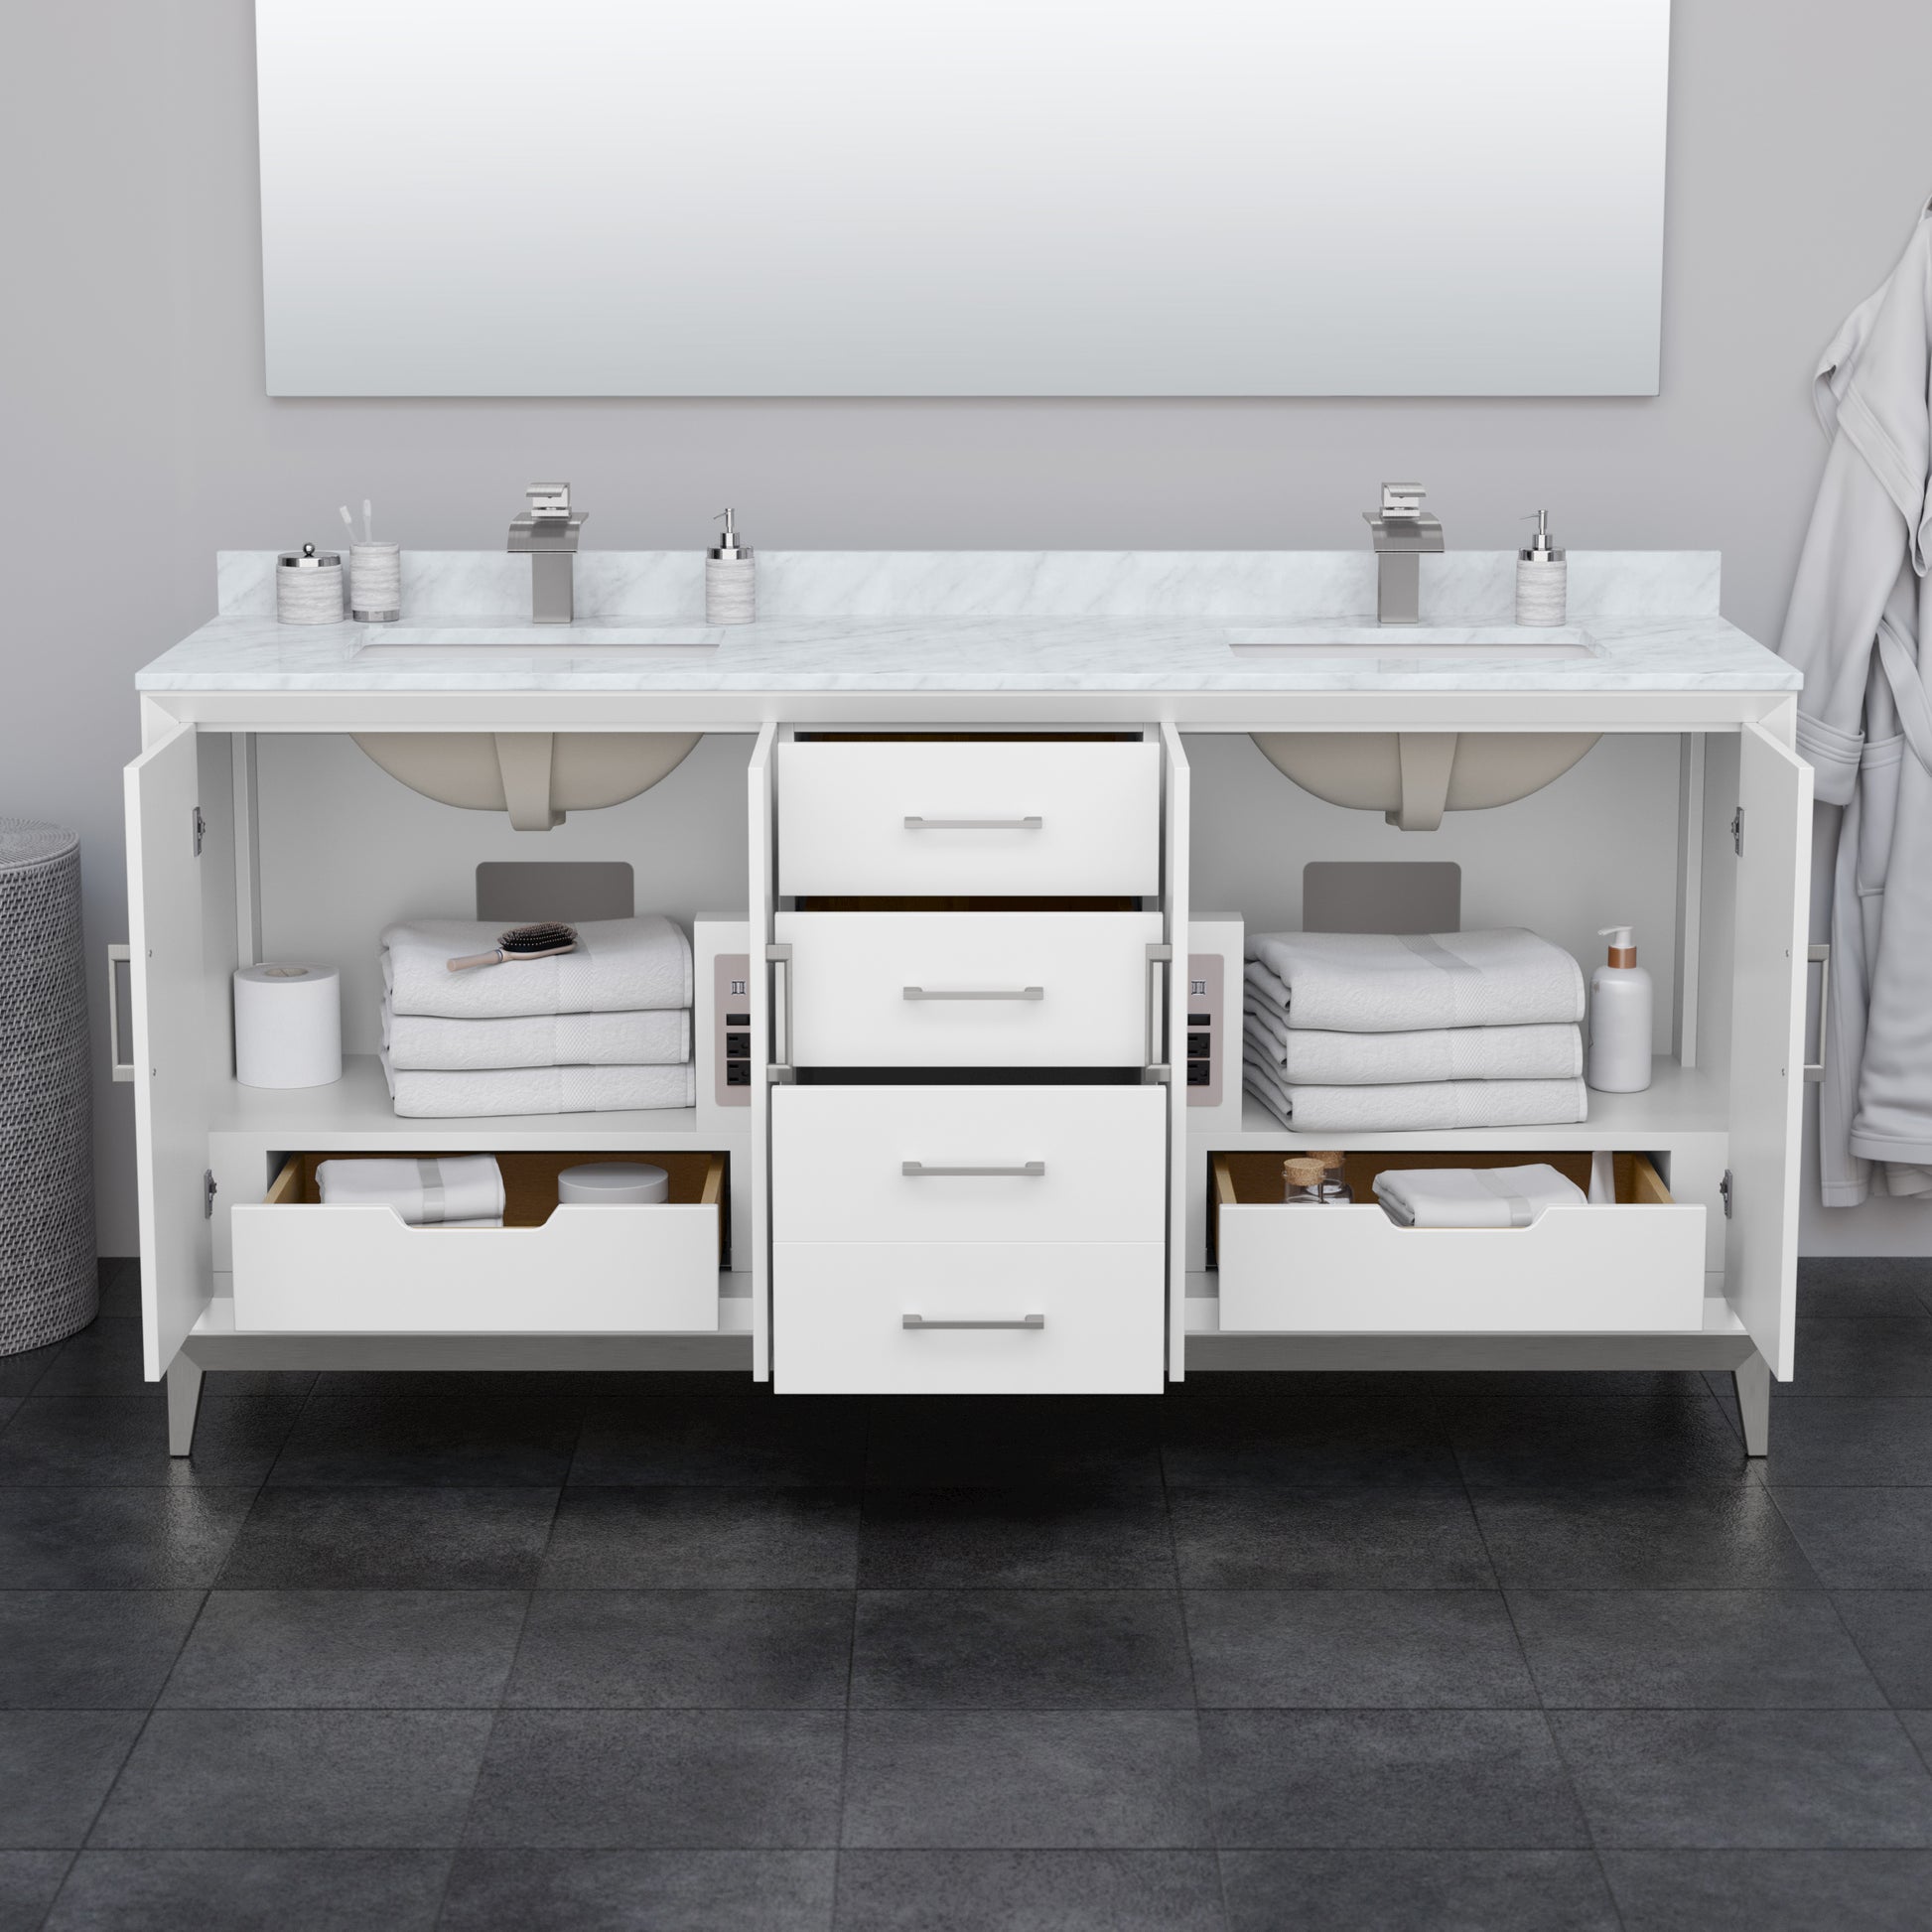 
  
  Amici 72" Double Bathroom Vanity in White, with Cultured Marble, Undermount Square Sink, Optional Trim
  
